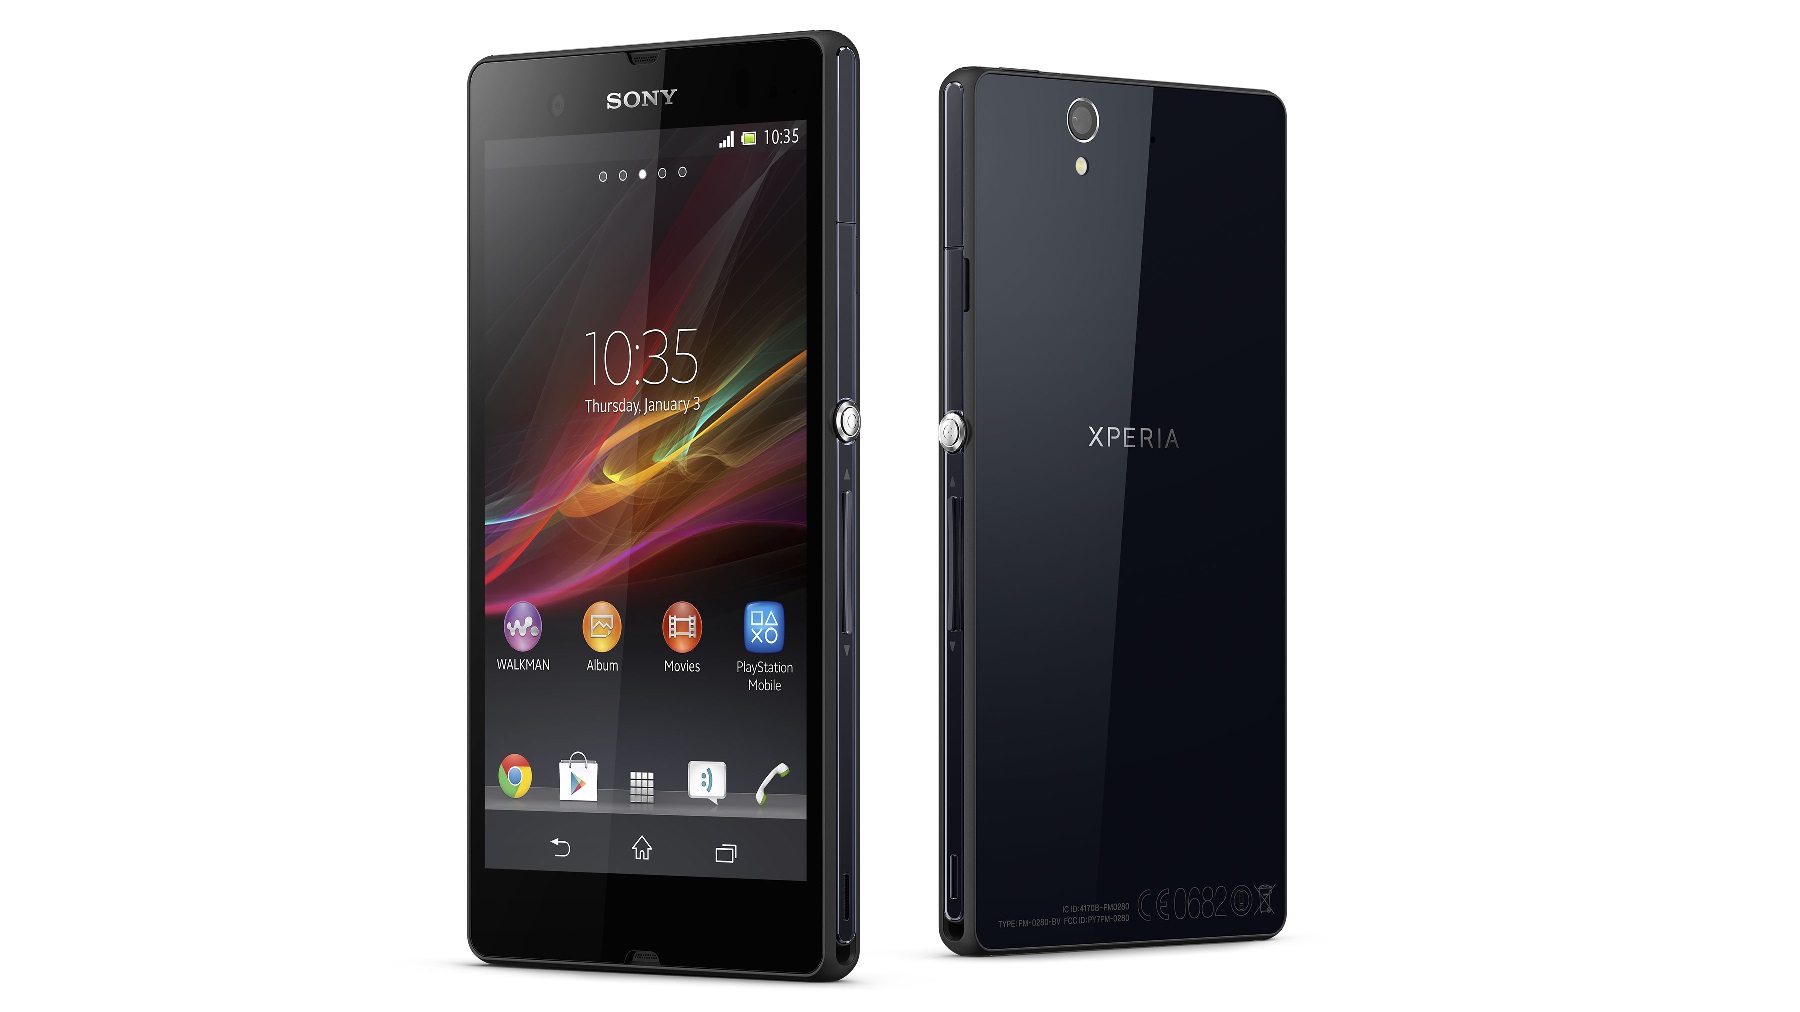 Sony Will Release Android 4.2 Immediately After Xperia Z is Launched